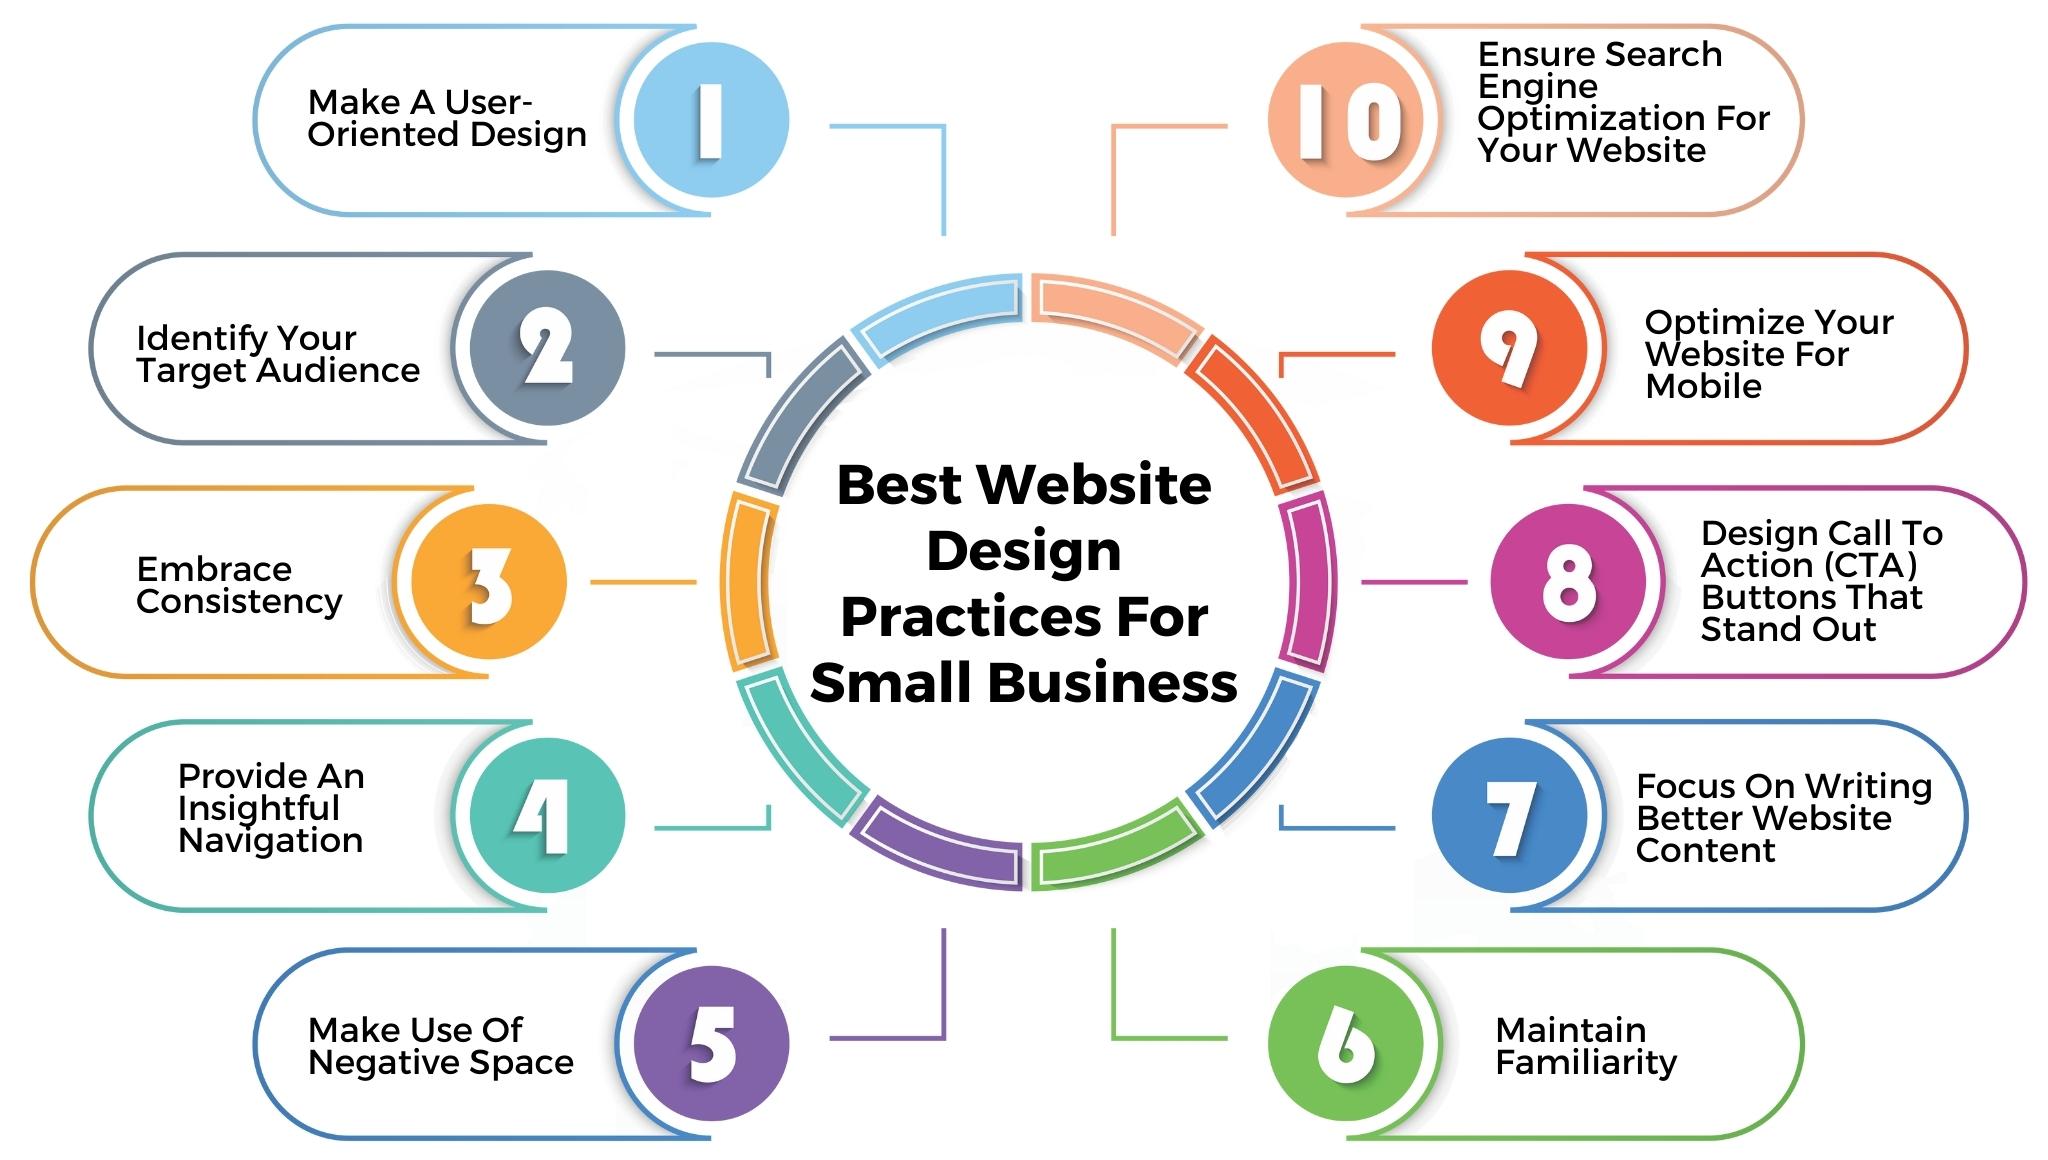 10 Best Website Design Practices For Small Business